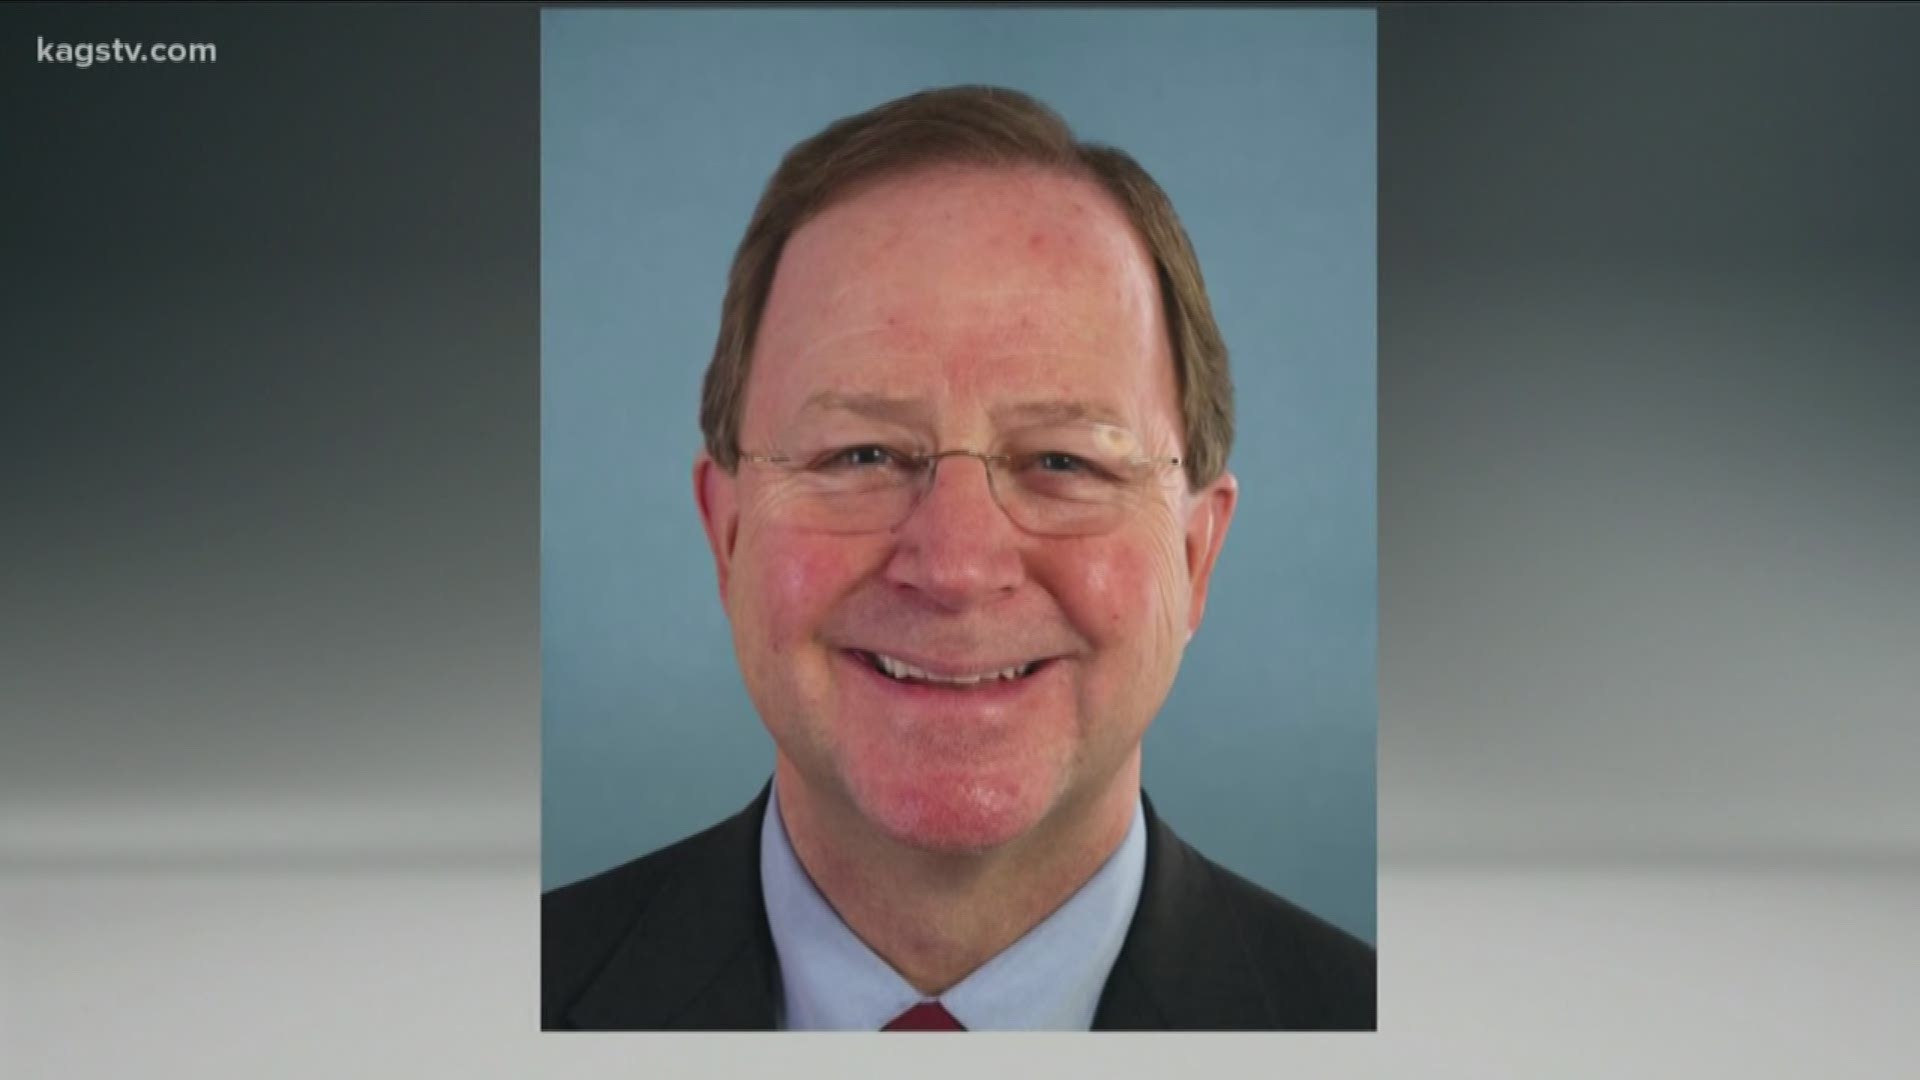 Local Congressman Bill Flores will be donating his net pay to the Fisher House Foundation.